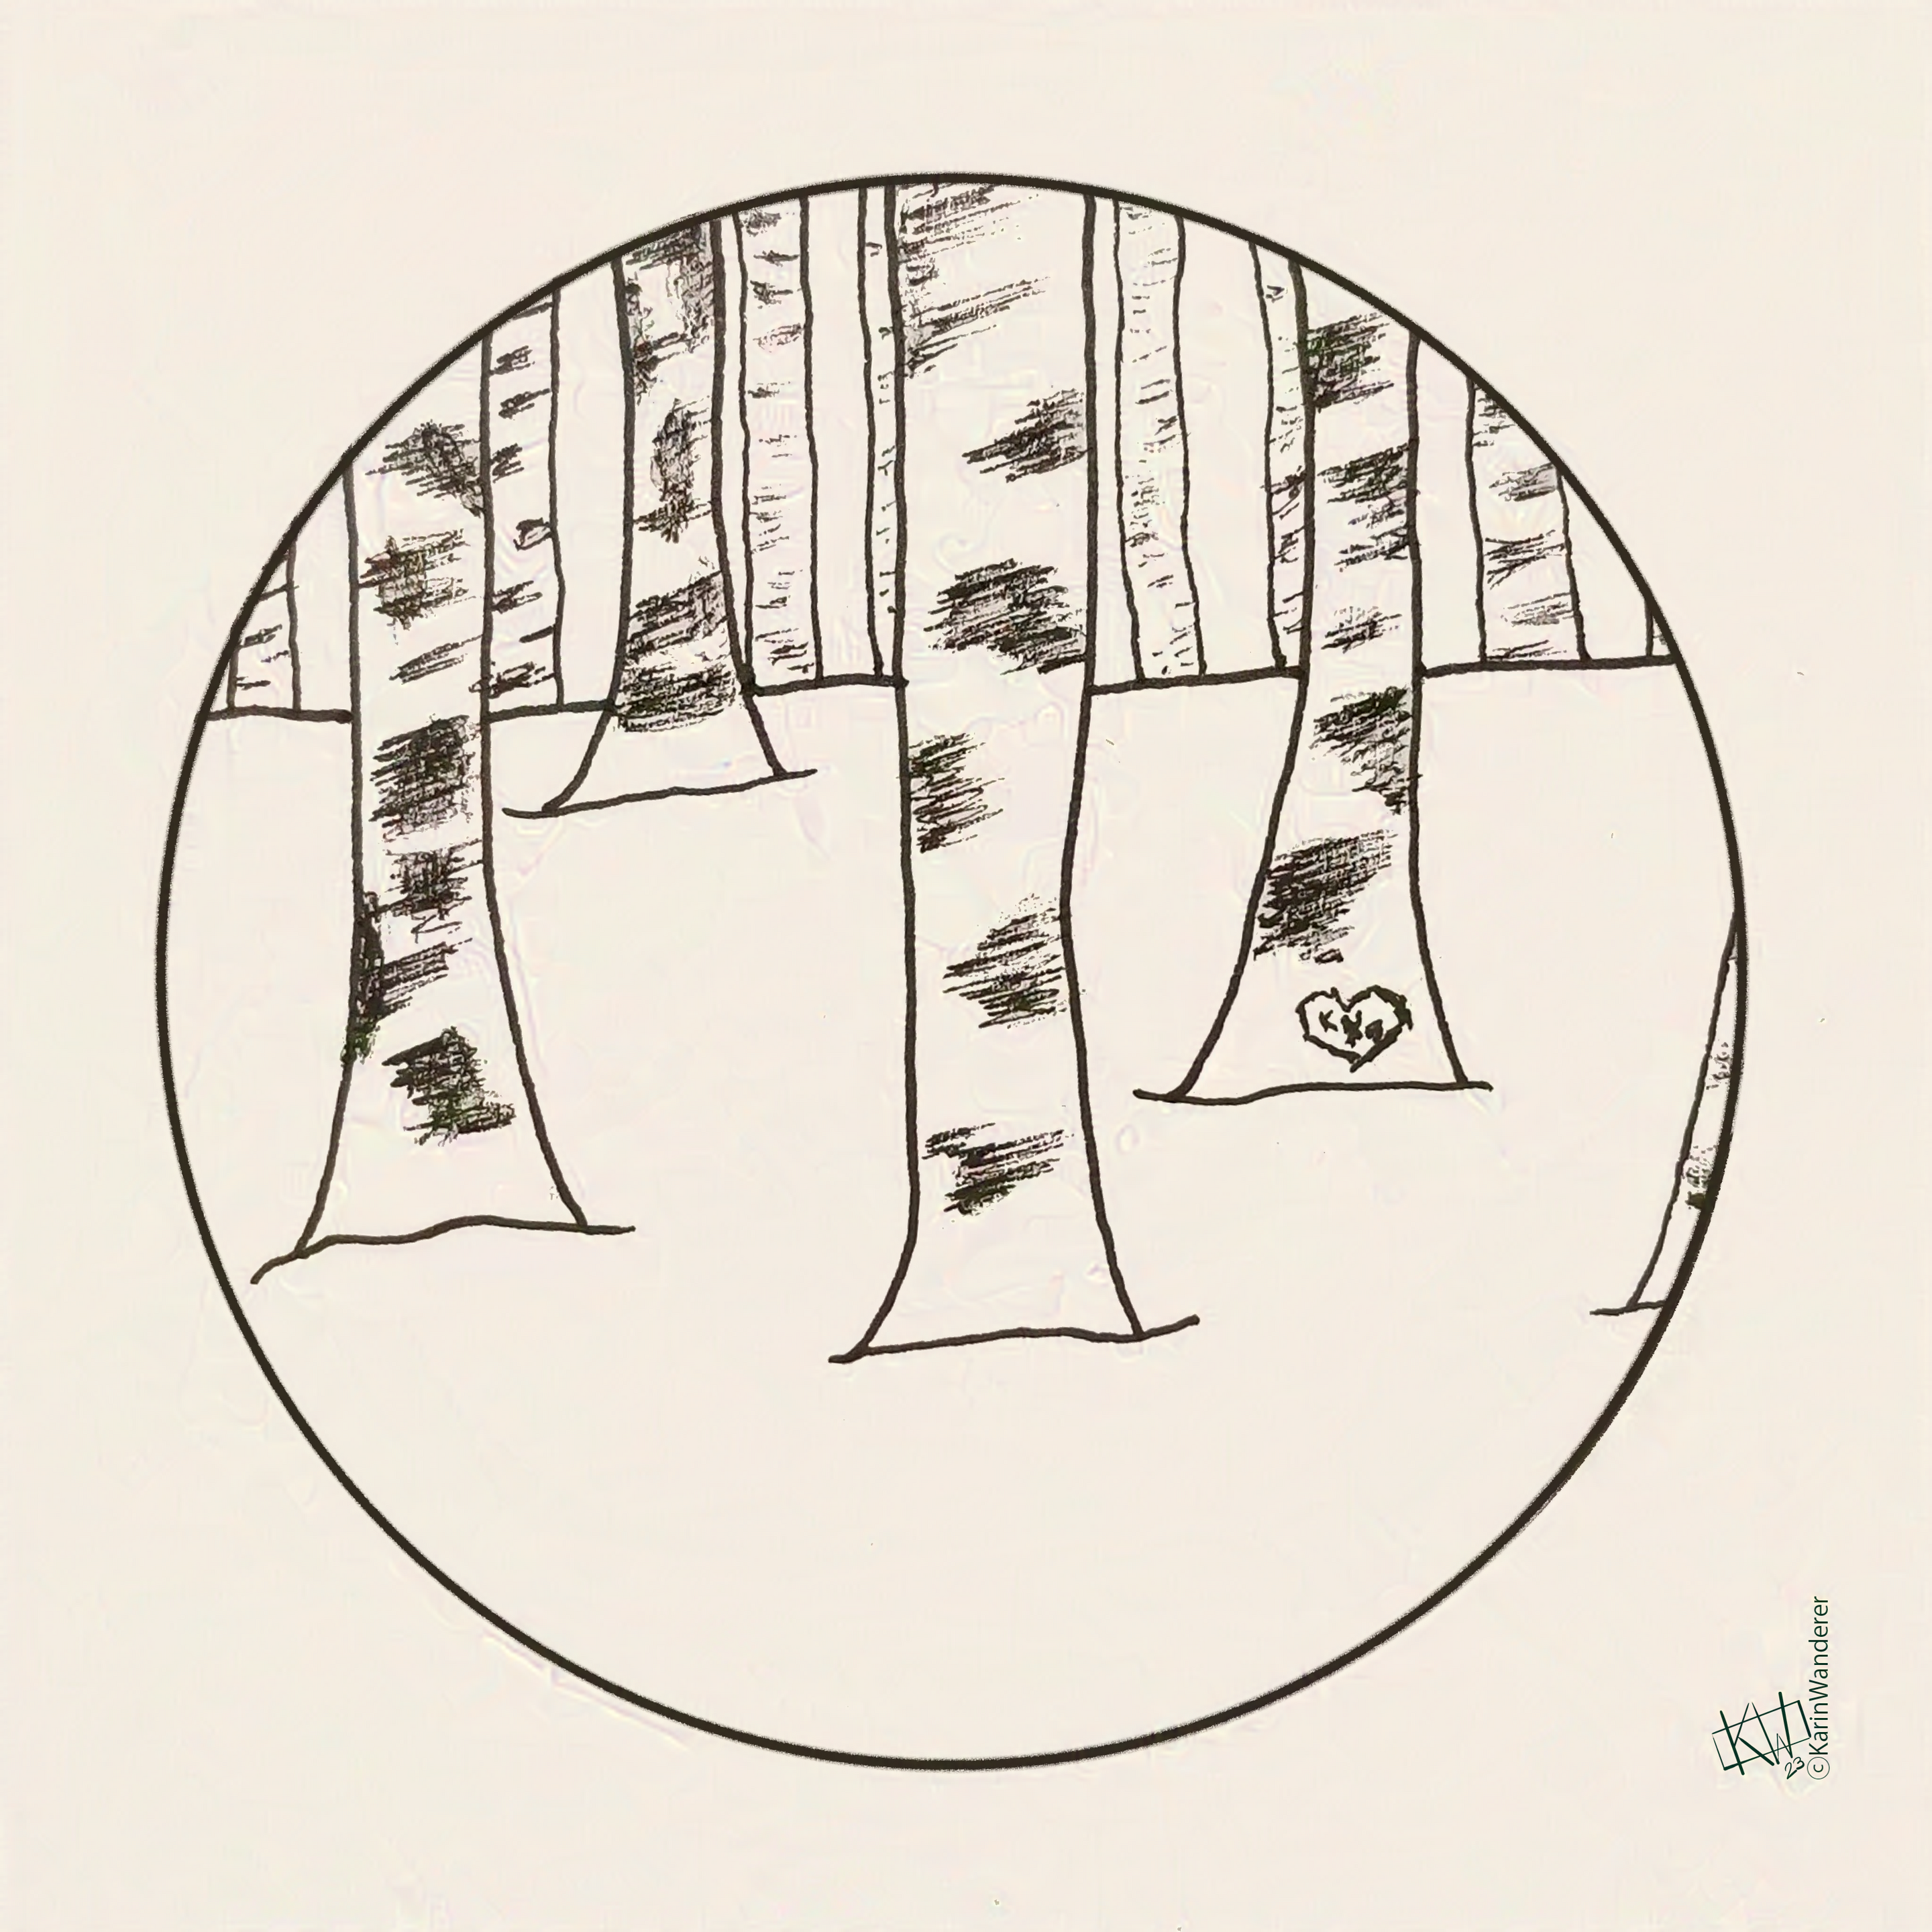 Line art of a birch forest. One tree has a heart & initials carved into it.